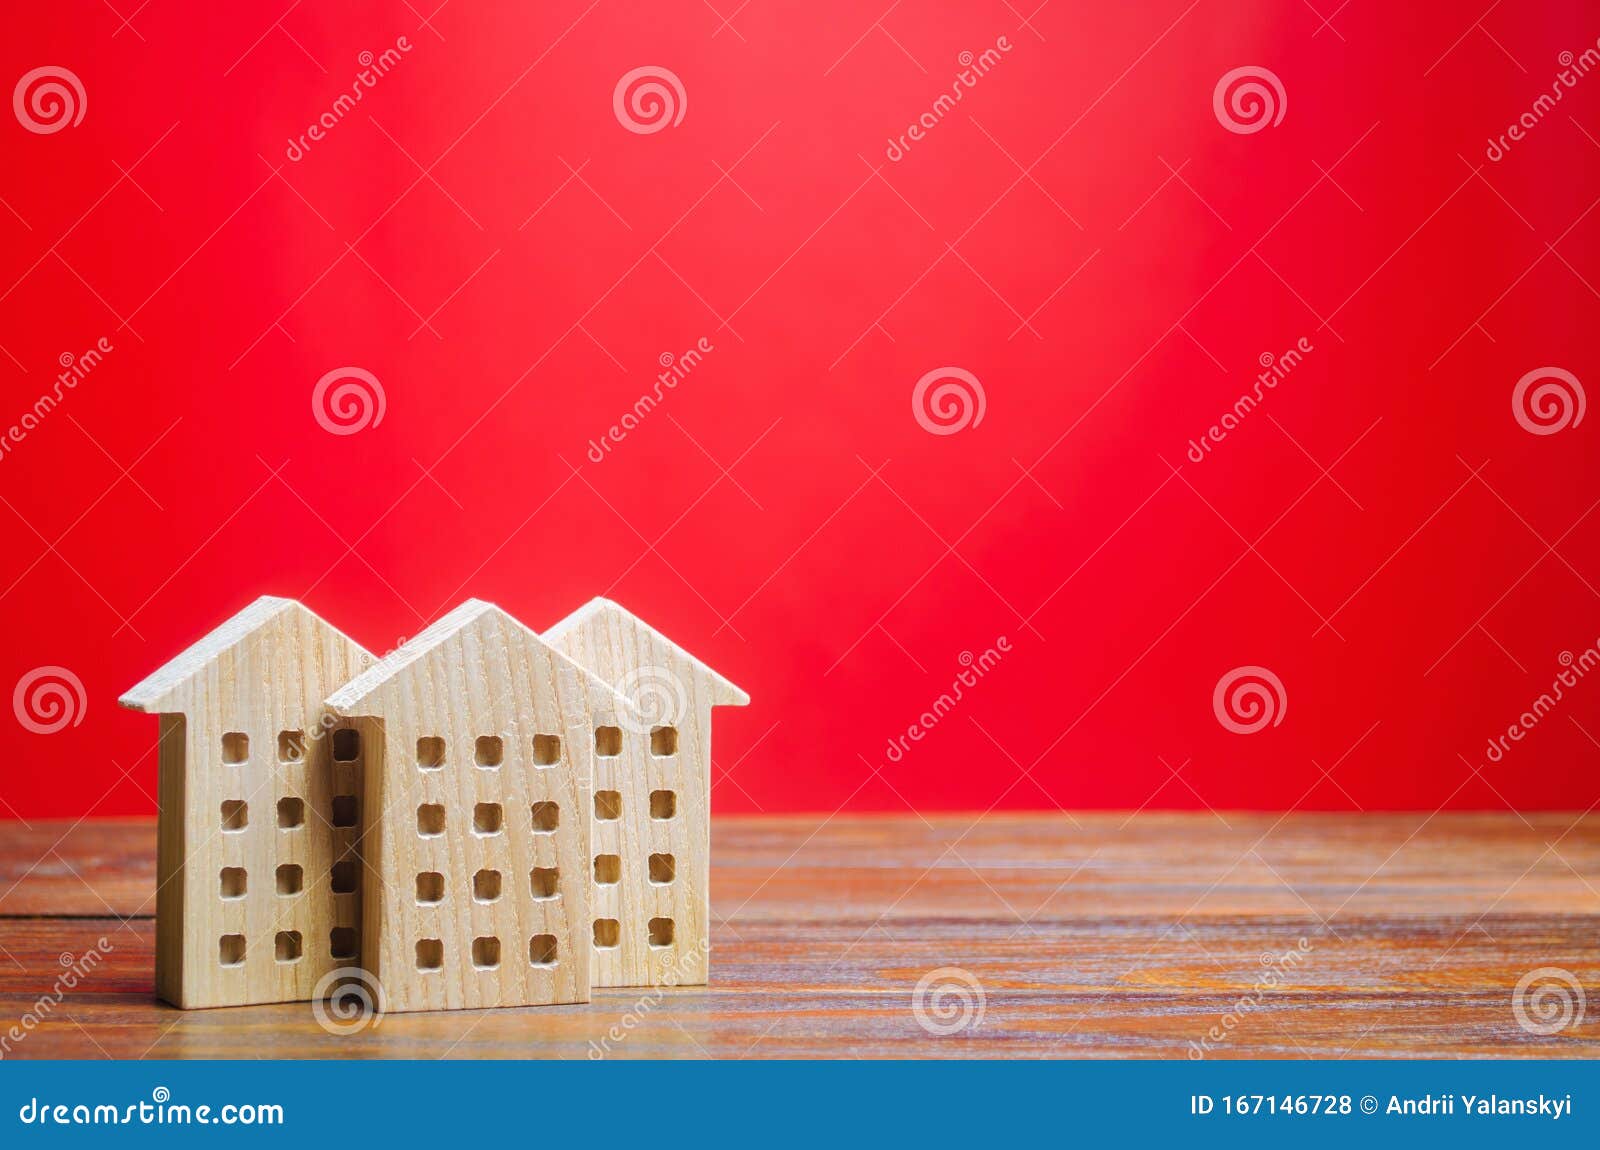 miniature wooden houses on a red background. real estate concept. city. agglomeration and urbanization. market analytics. demand